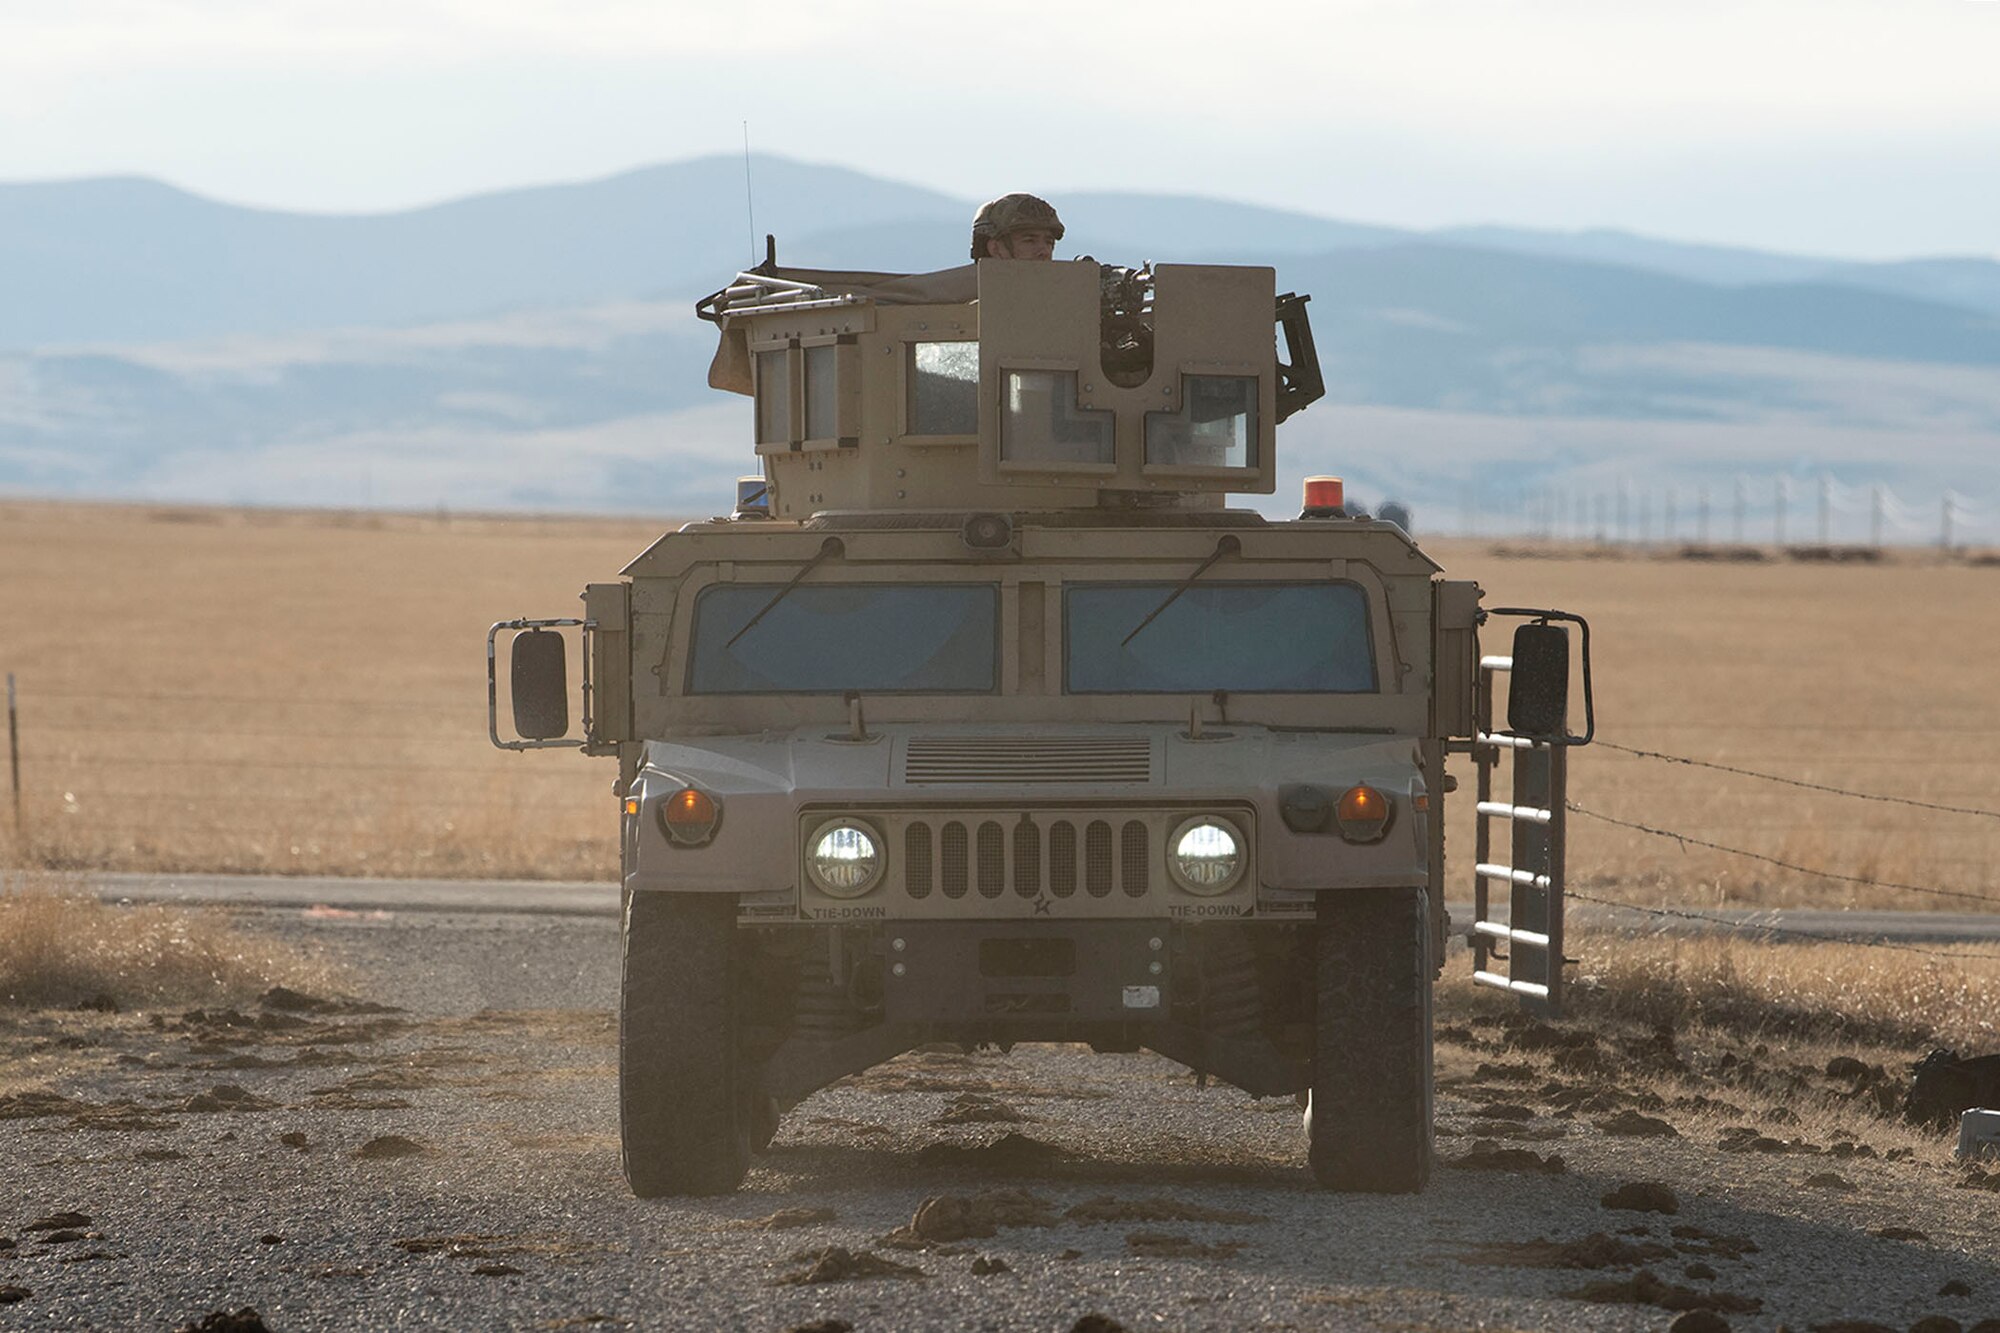 A humvee sits in the center of the road driving towards the entrance of the launch facility with a blue mountain range in the background of the photo.